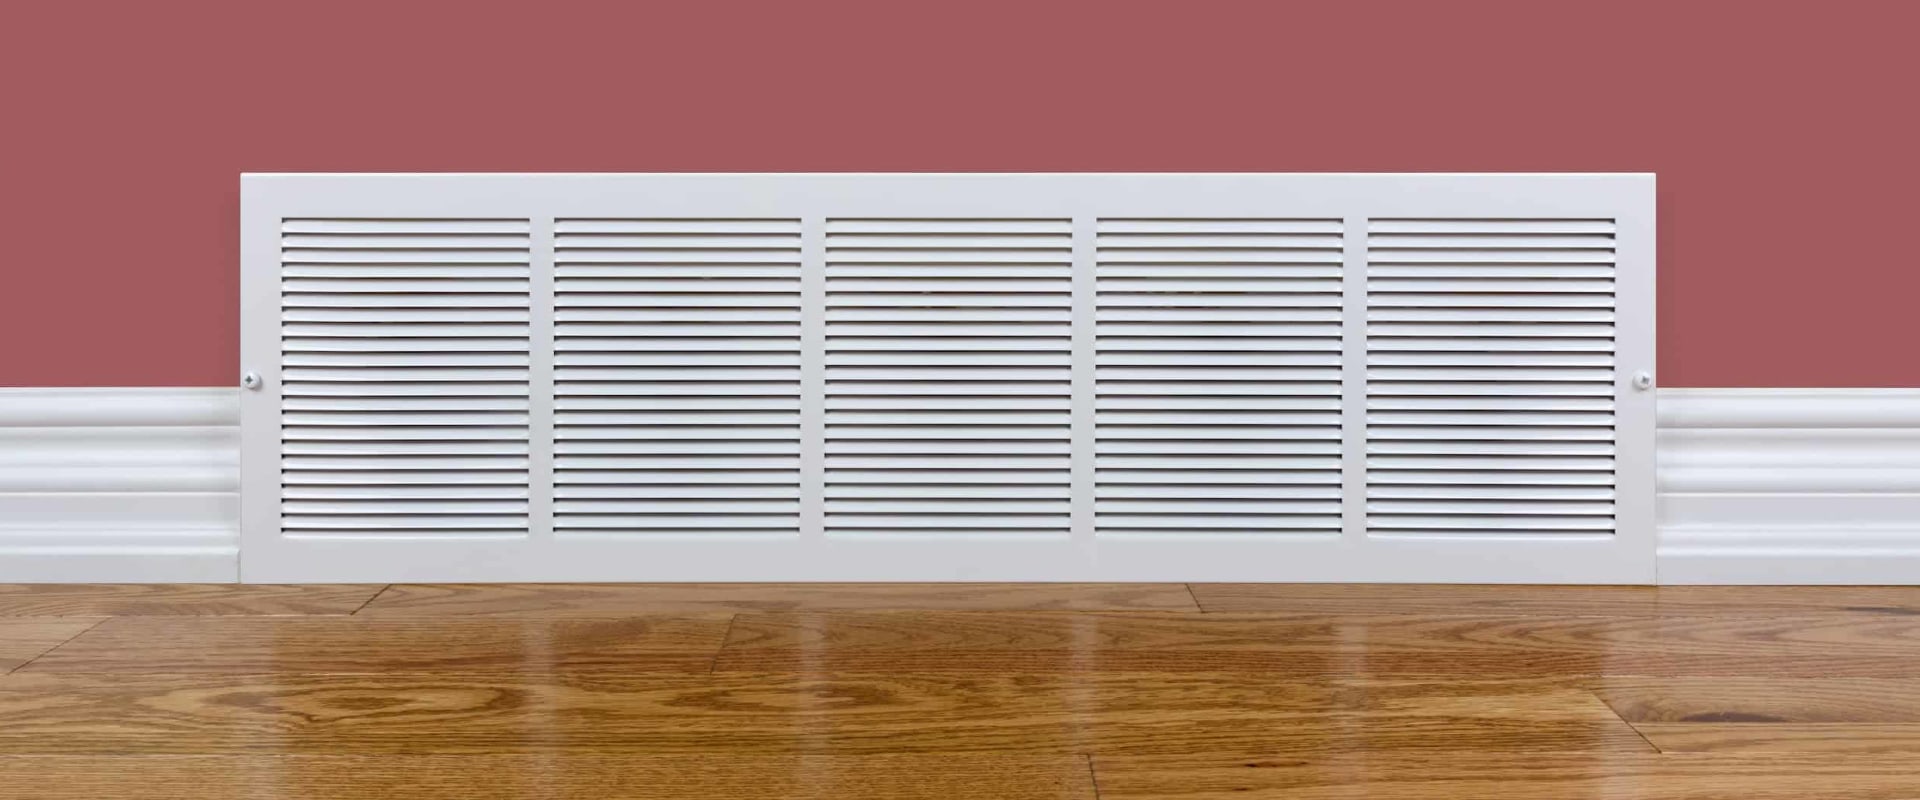 How Often Should You Change the Filters on Your HVAC System in West Palm Beach, FL?